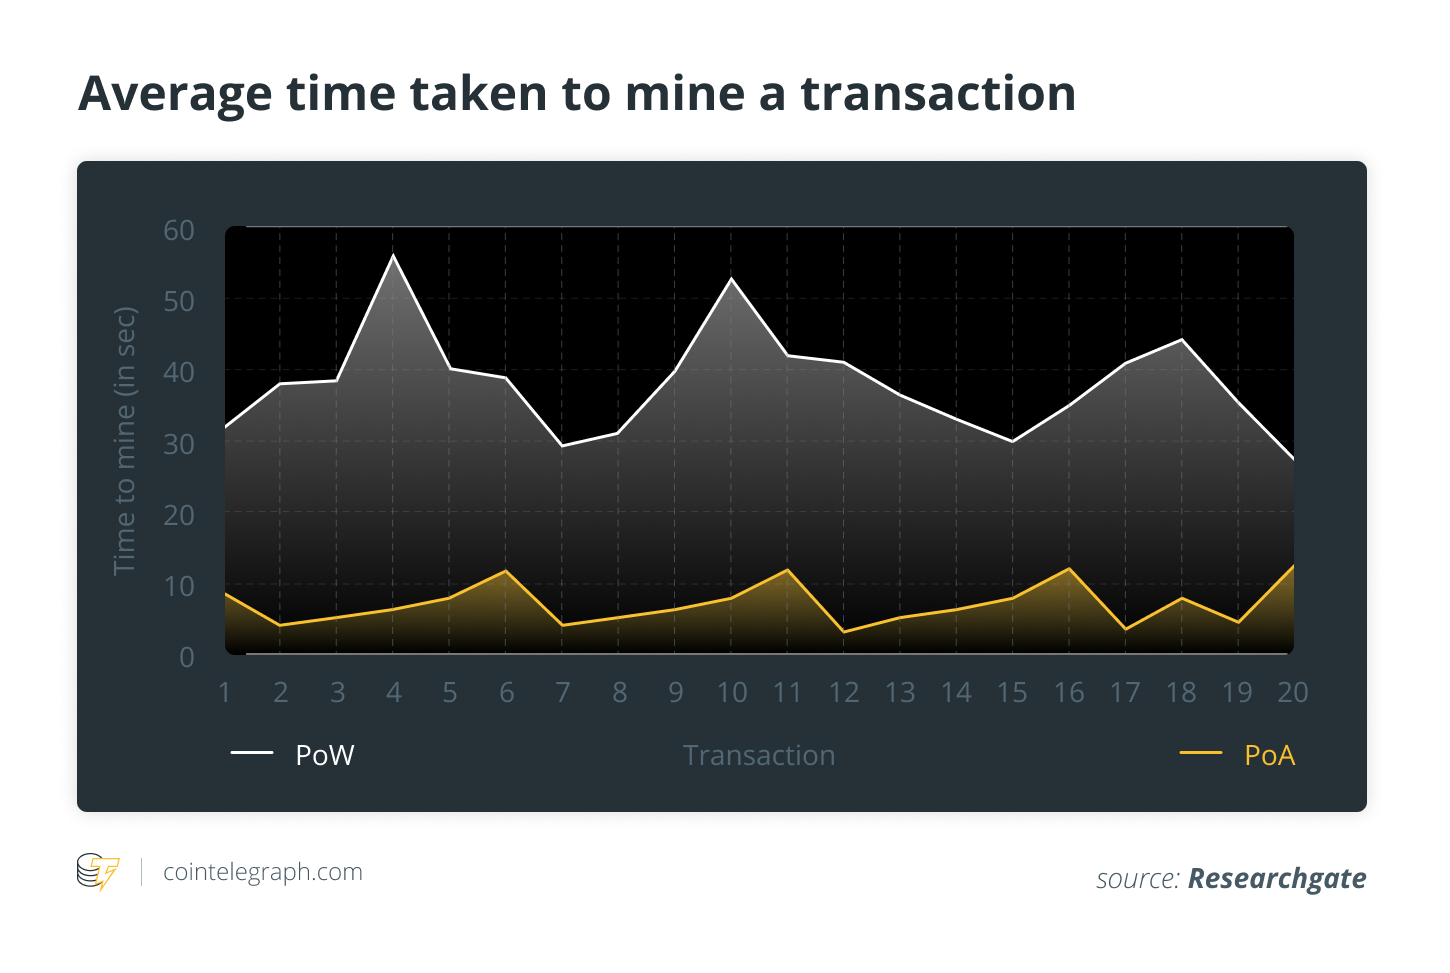 Average time to mine a transaction